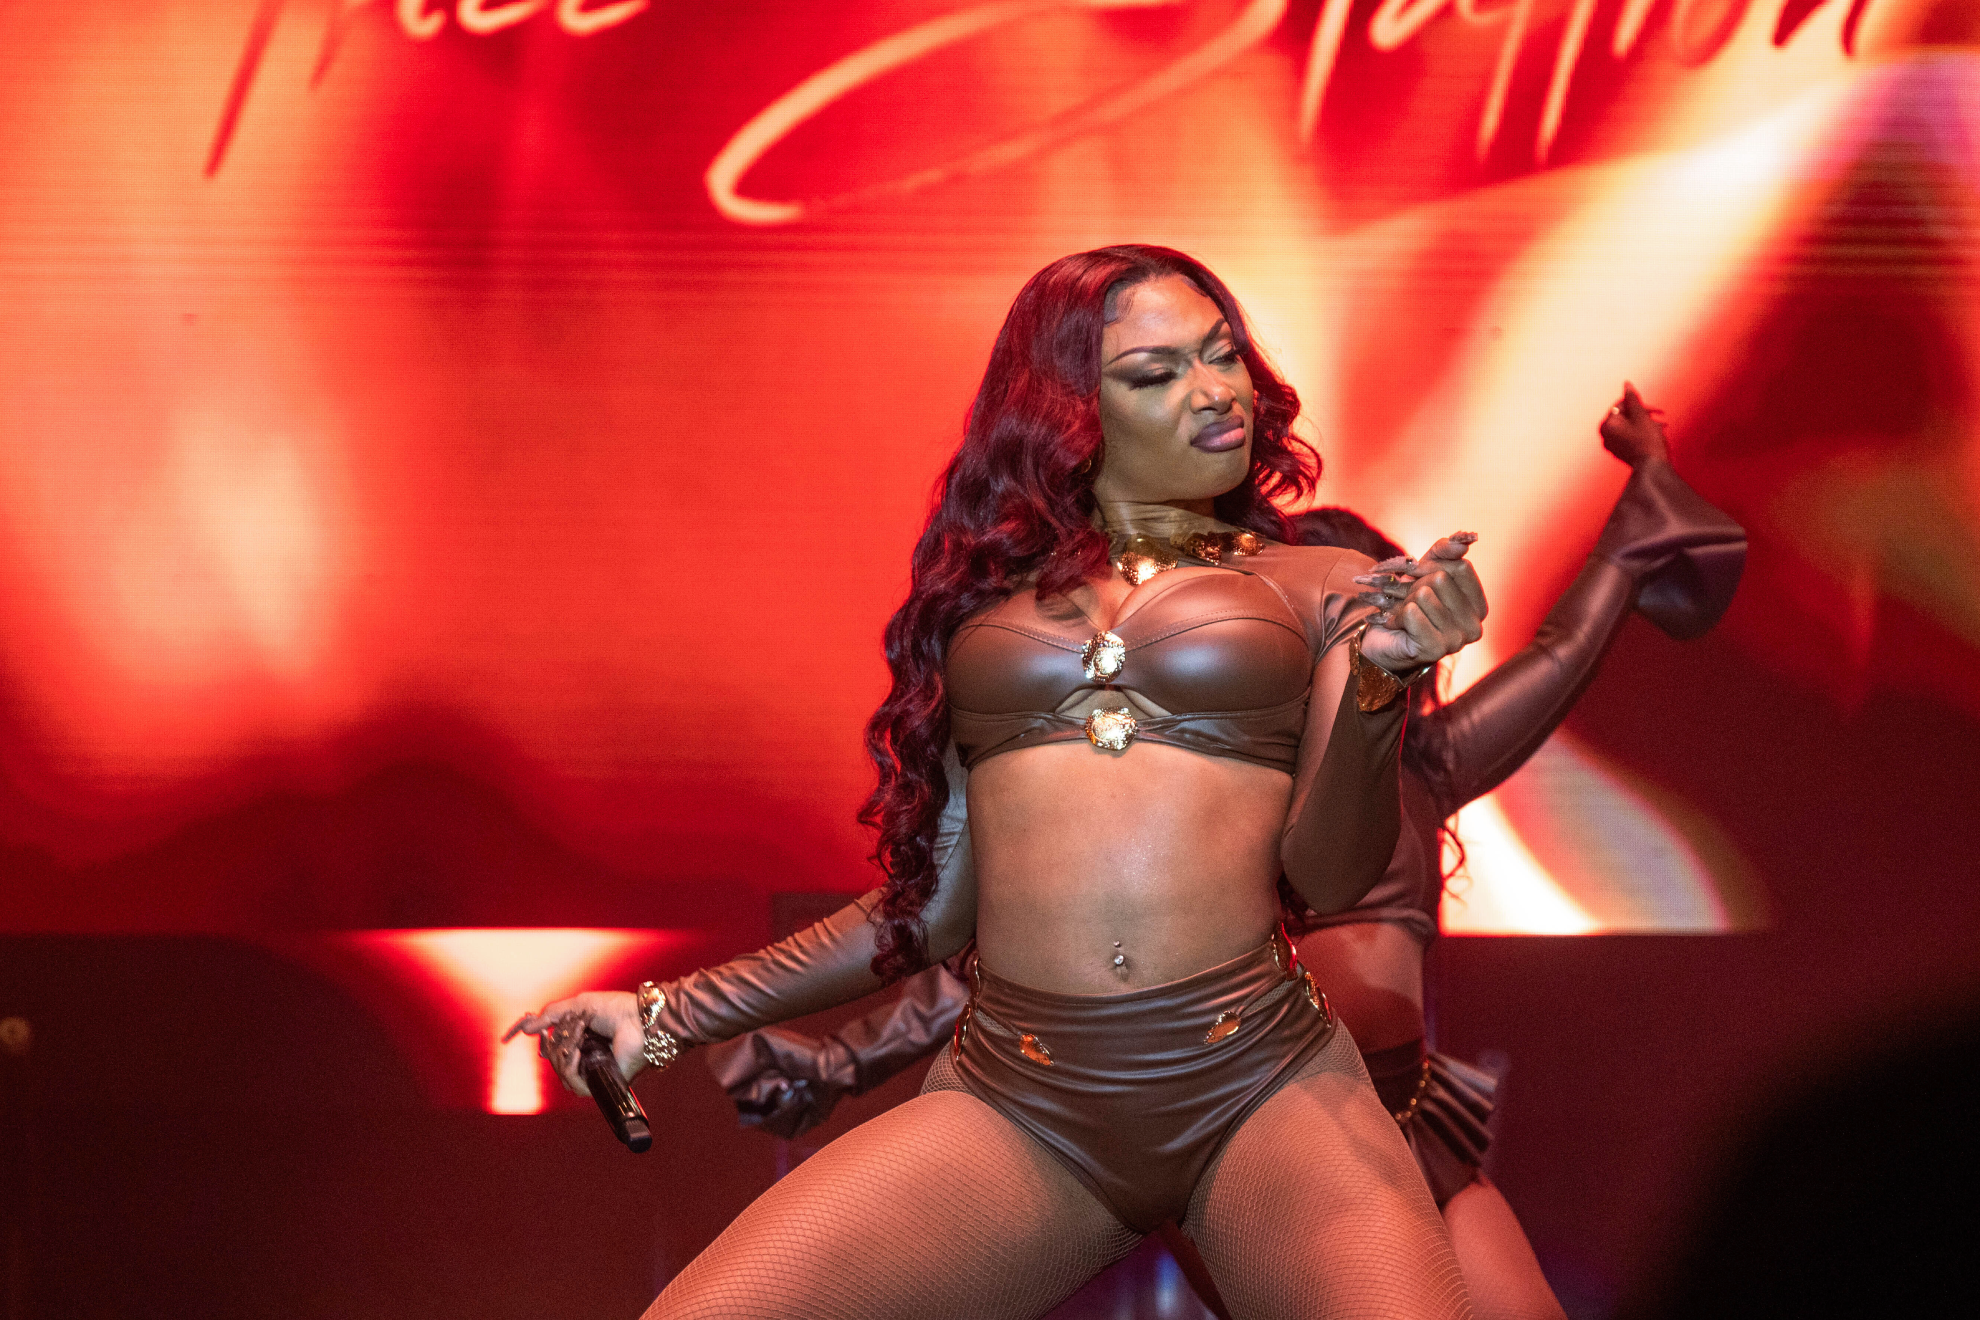 Megan Thee Stallion says she 'ain't a freak no more' during viral Instagram live chat about sex